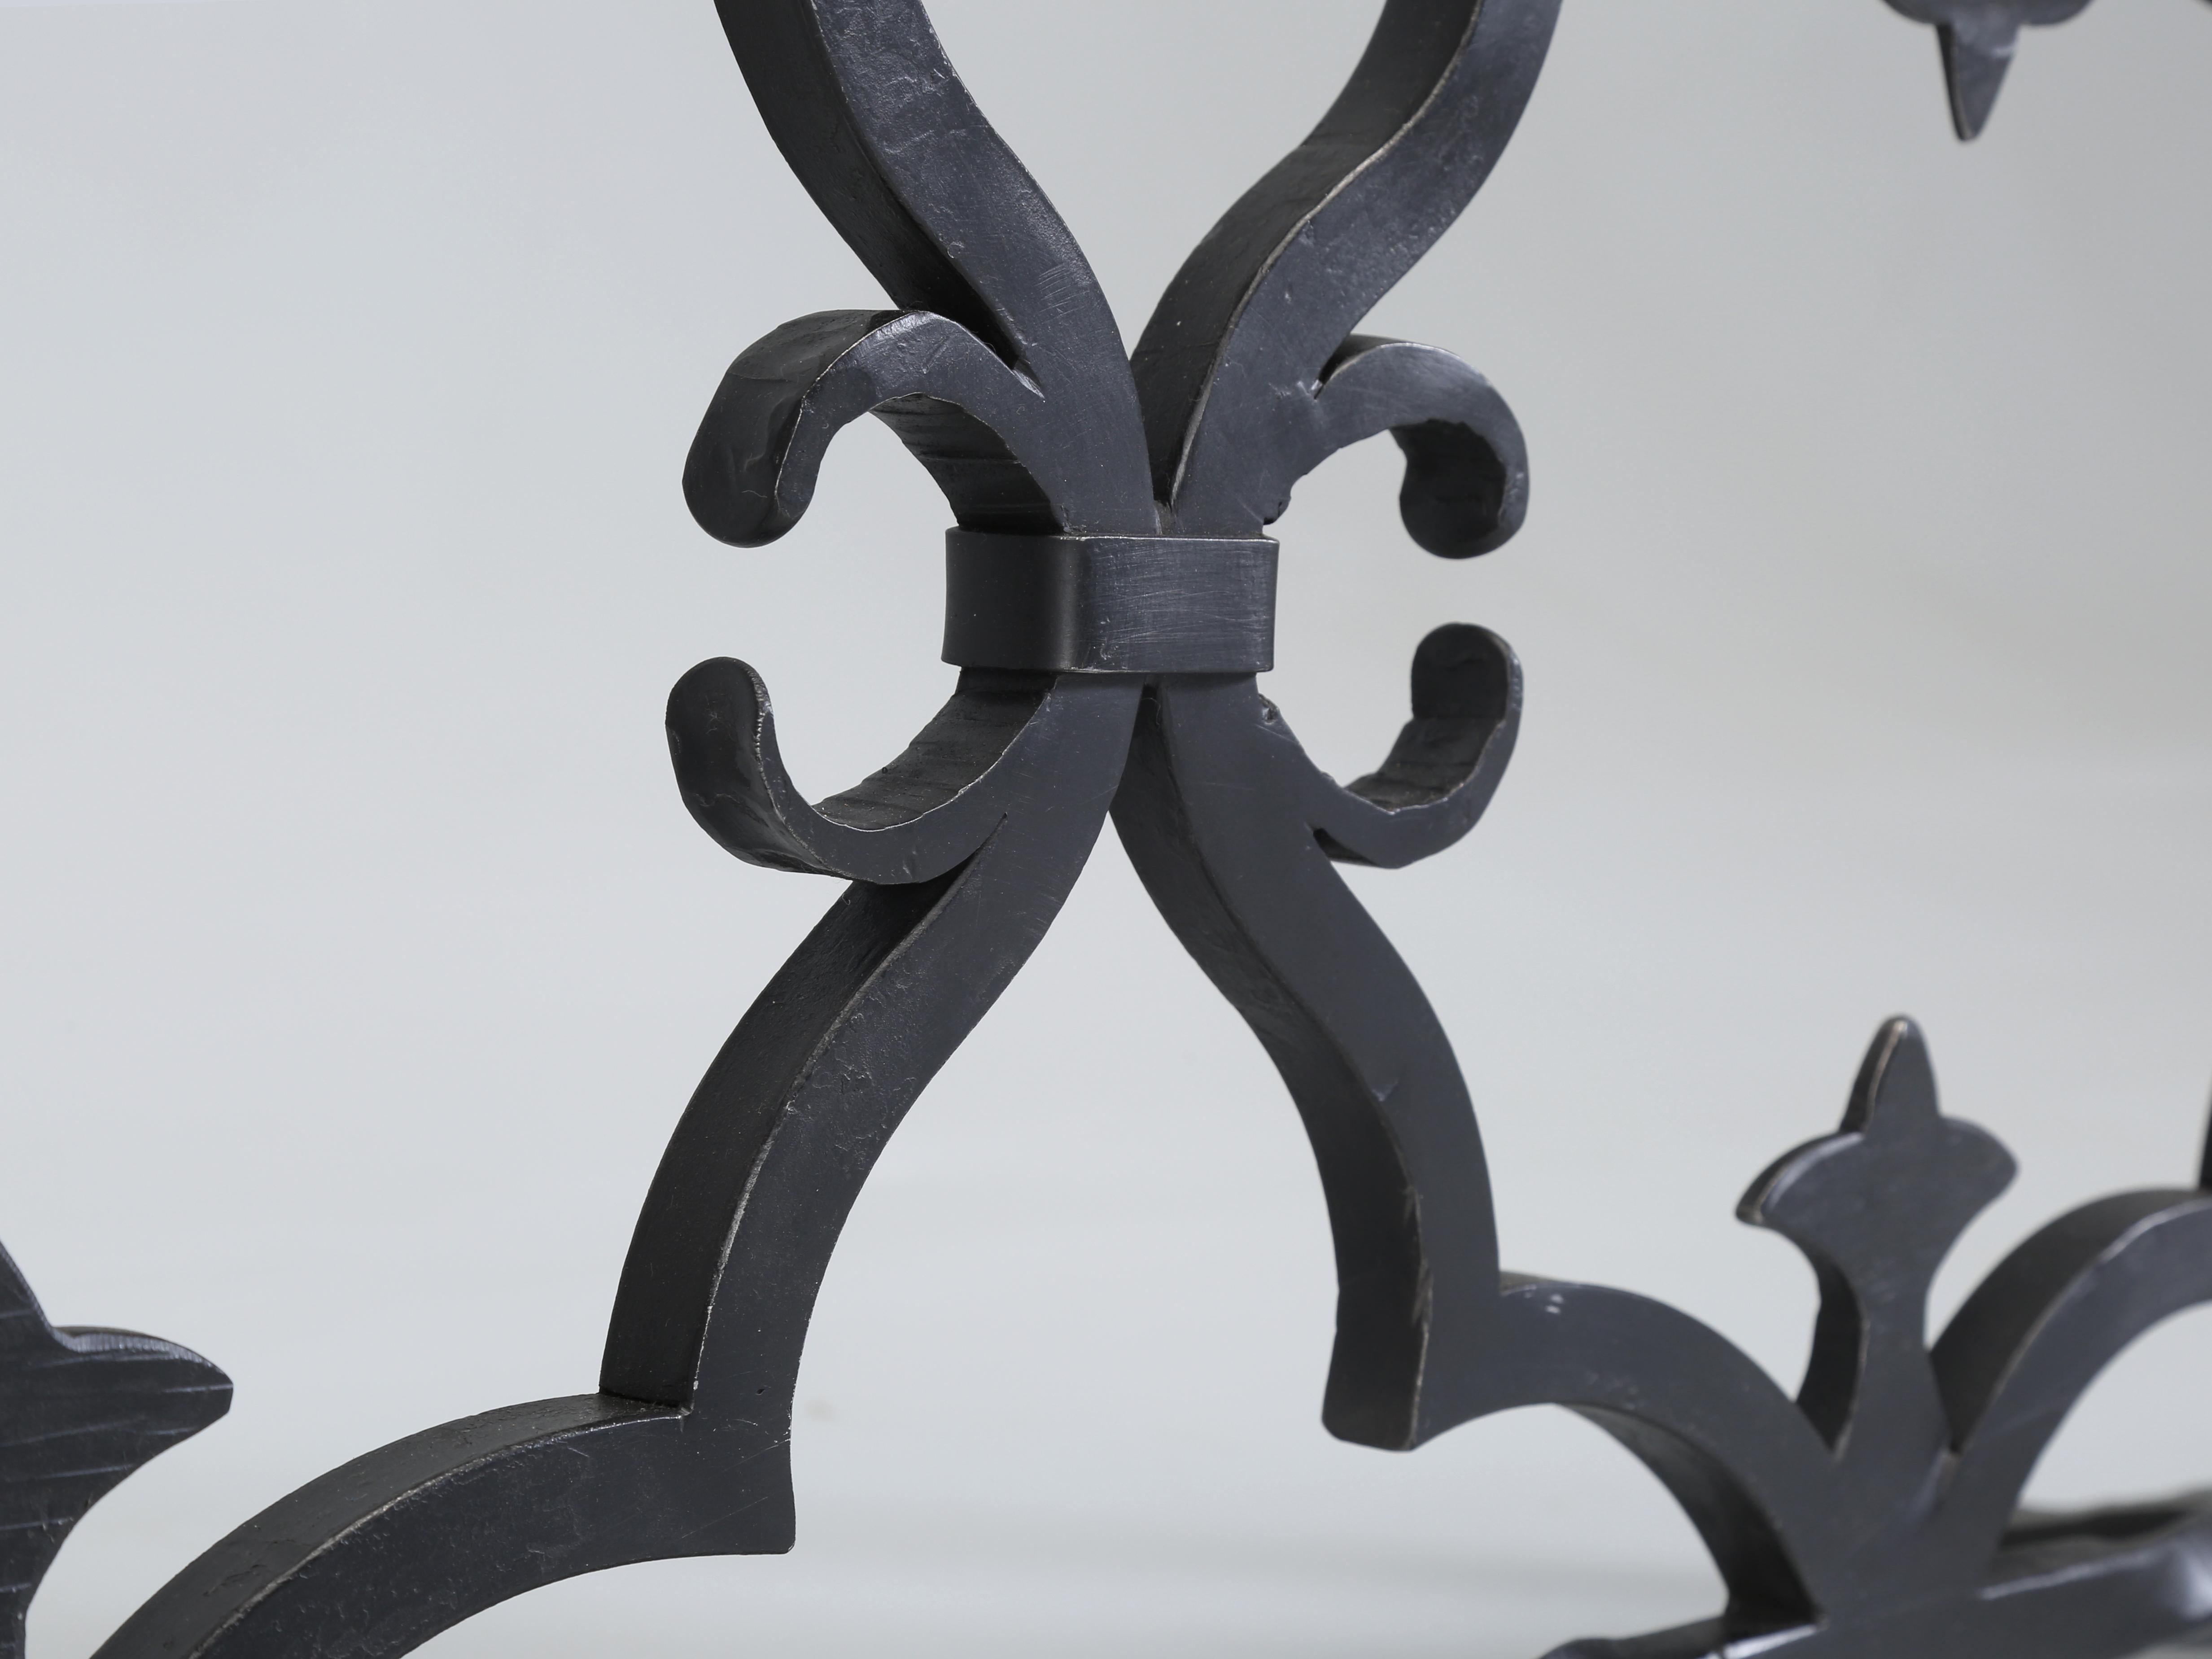 Hand-Wrought Iron Made to Order Old Plank Fireplace Screen Mediterranean Style For Sale 1